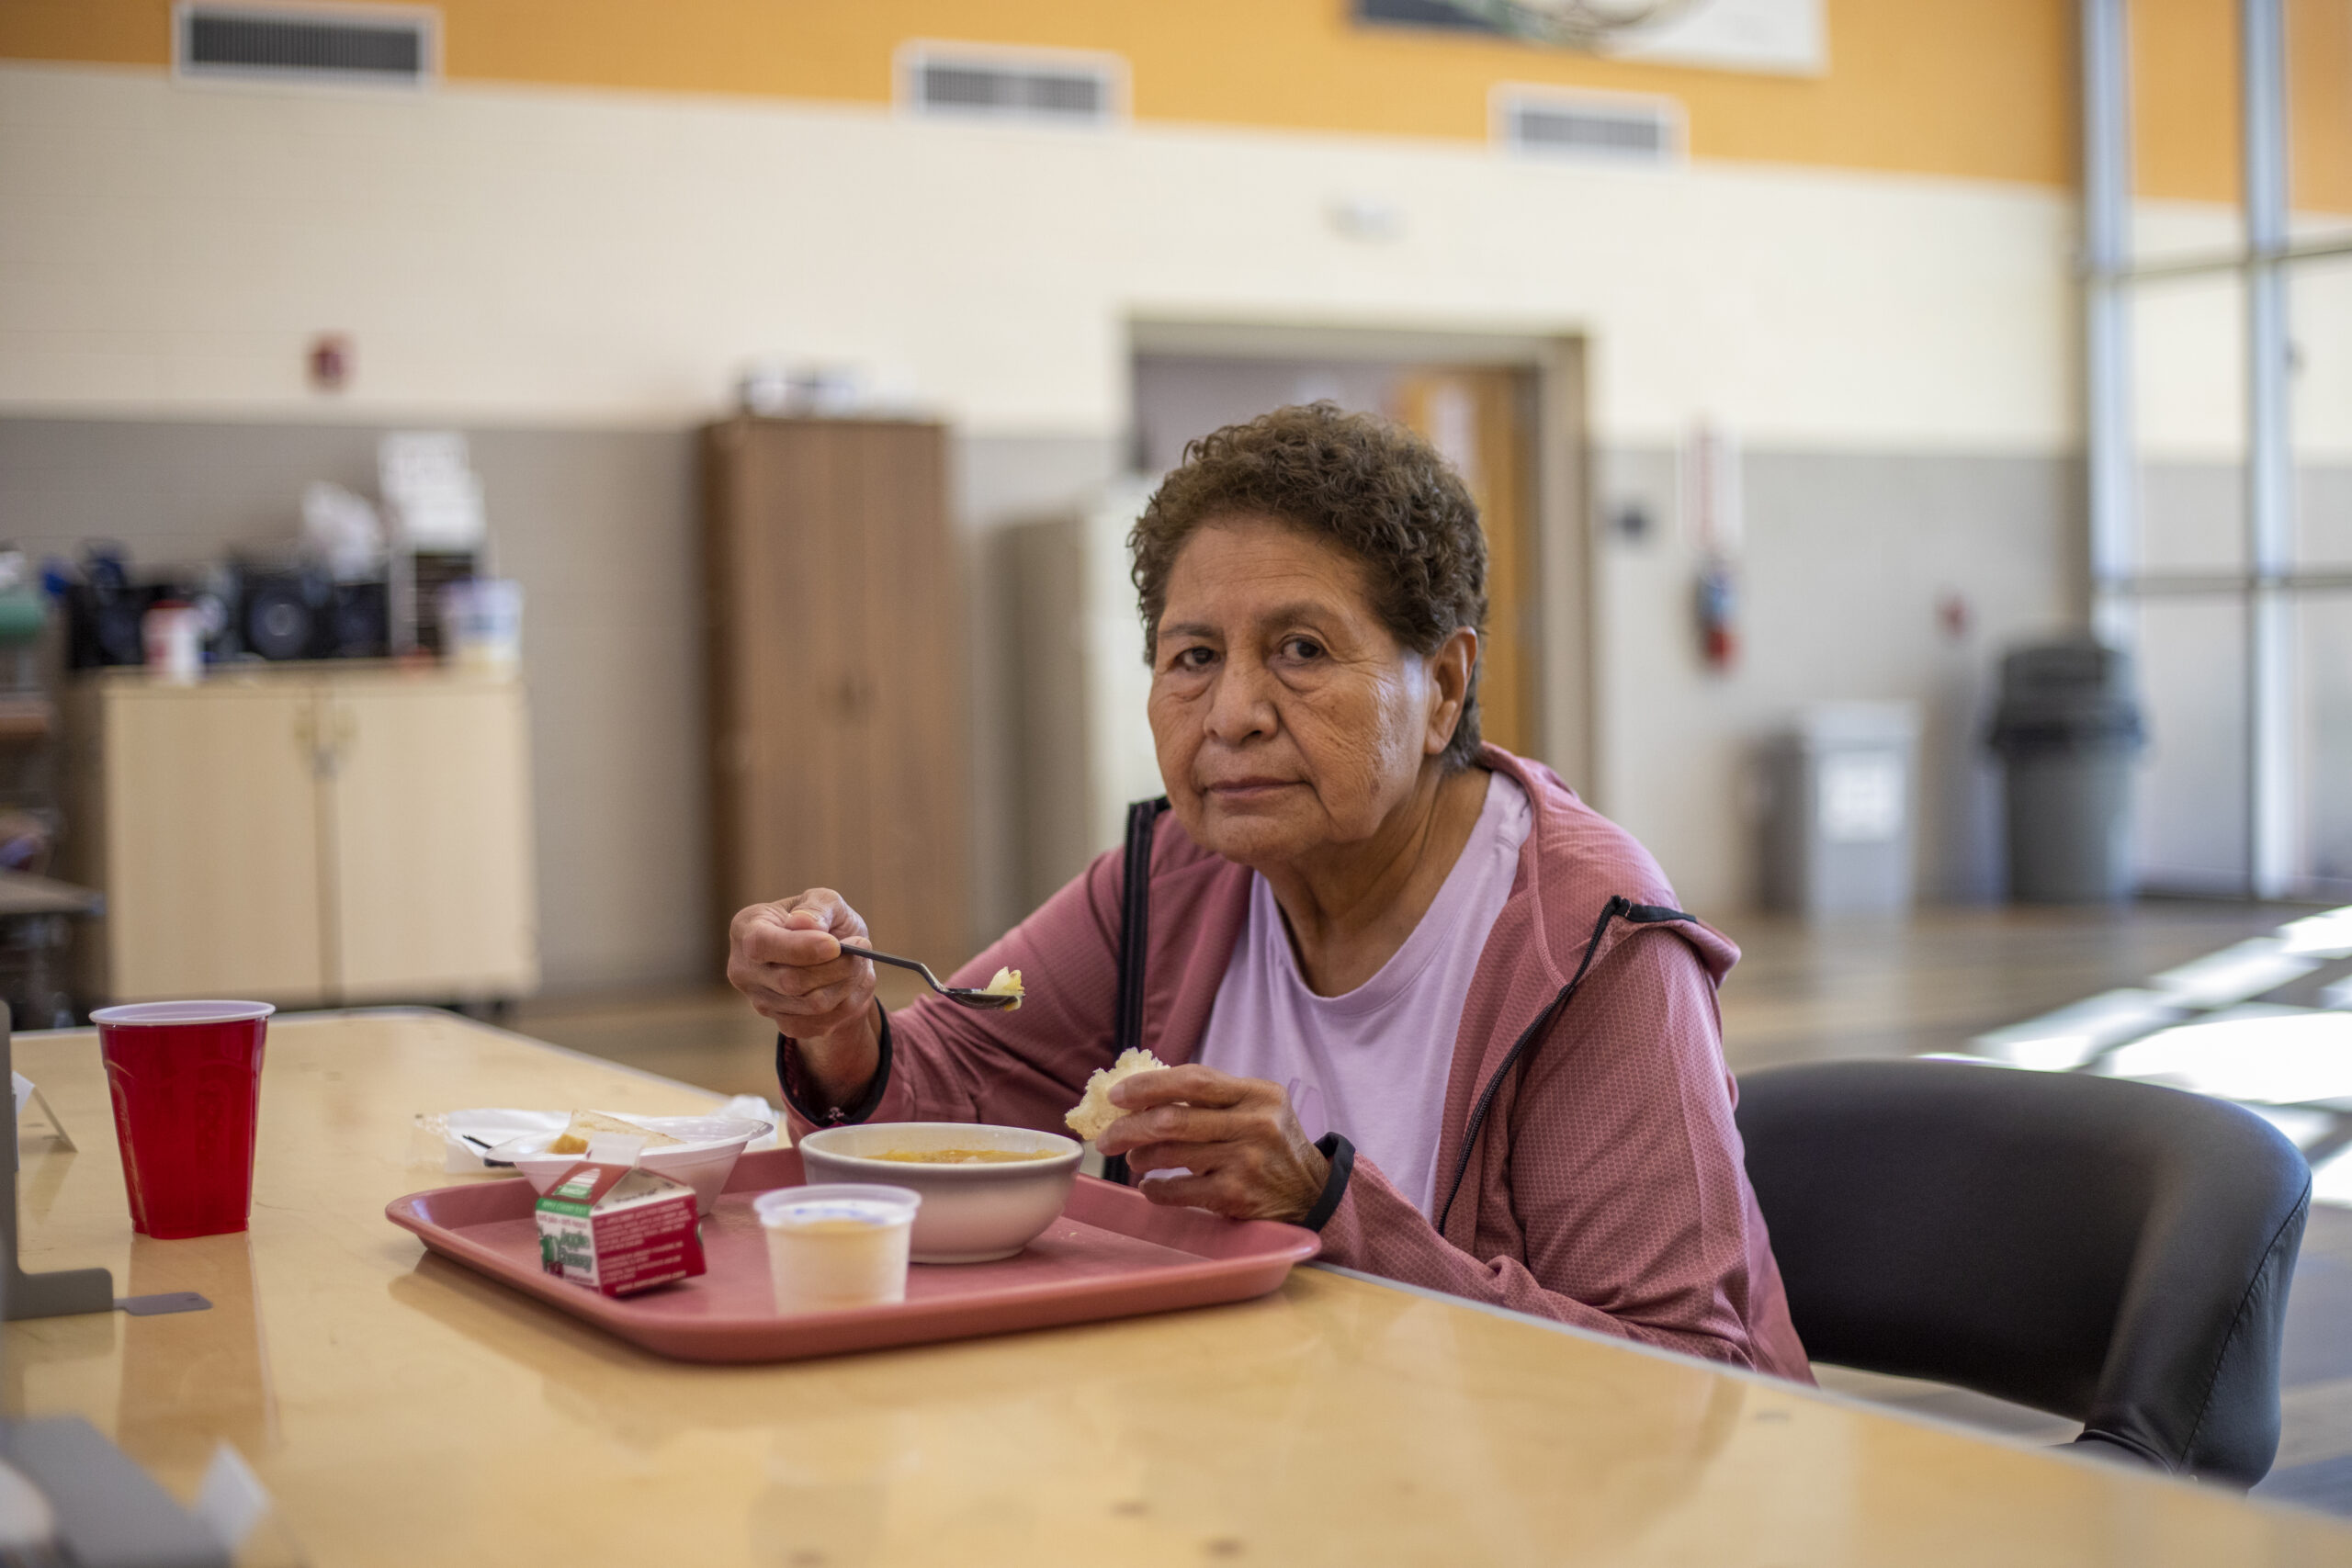 Healthy Meals for a Compassionate Grandmother